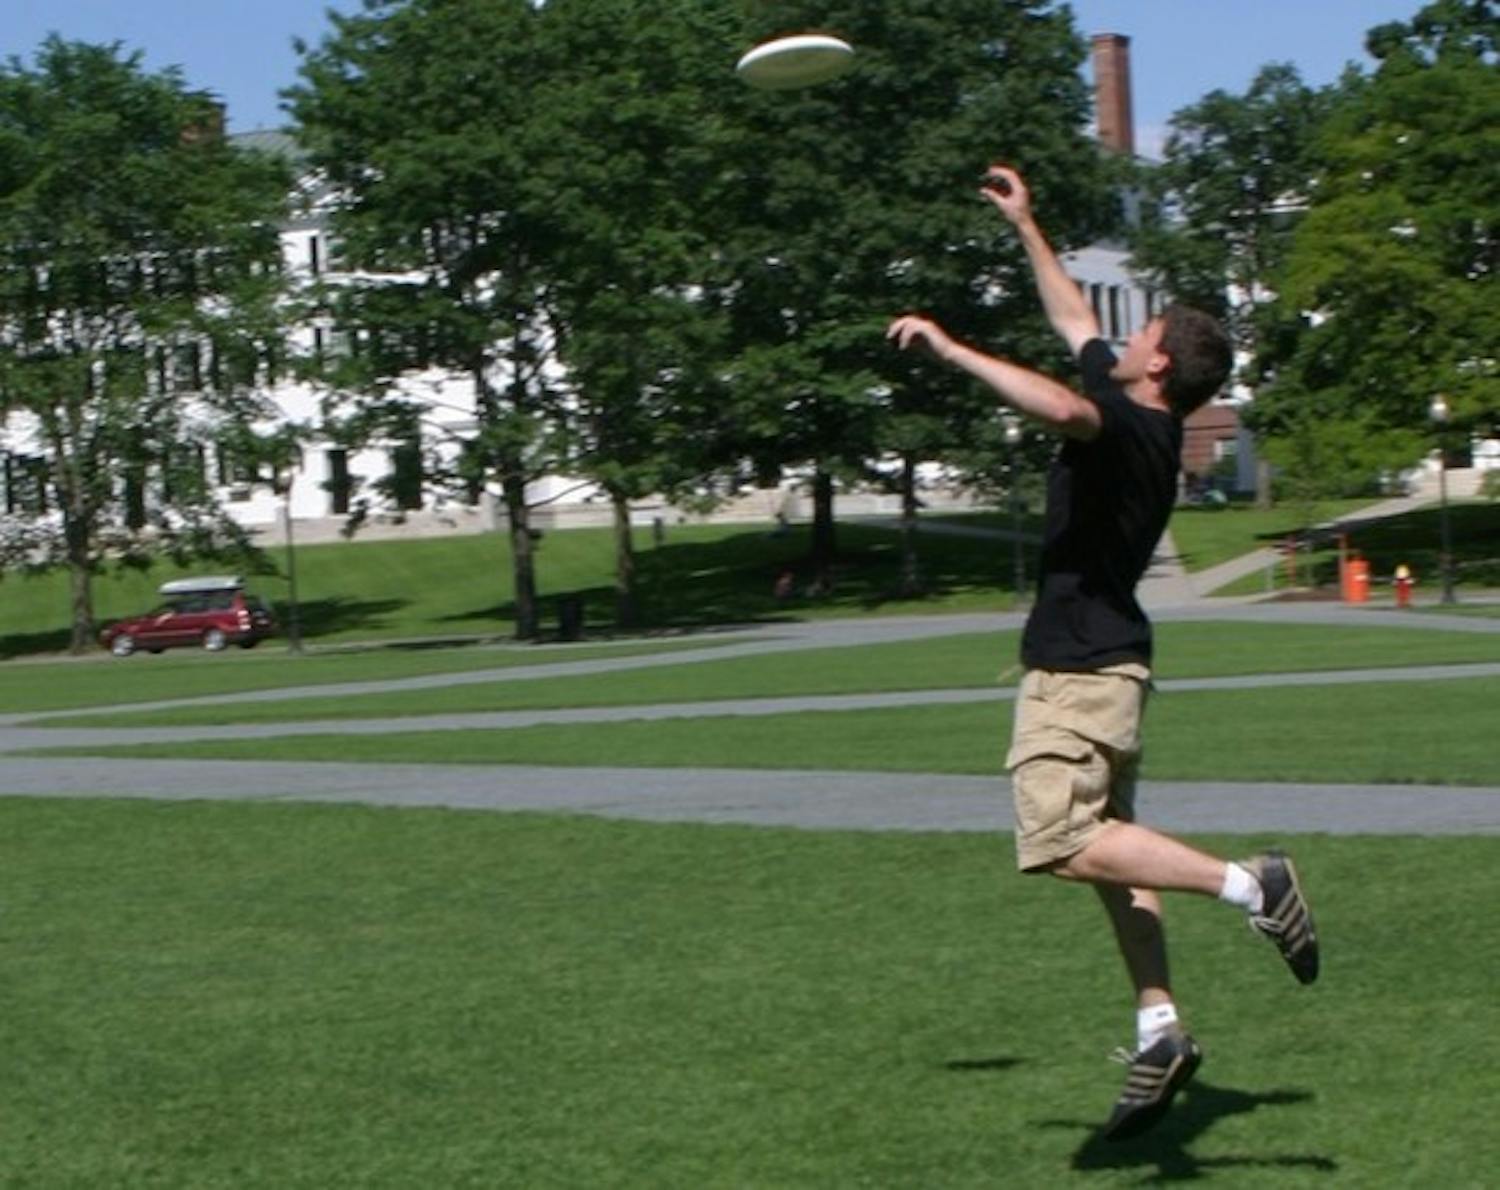 Daniel Ames '06 failed to realize there were nine better ideas for summer sporting fun when he chose to play with a frisbee on the Green Wednesday.